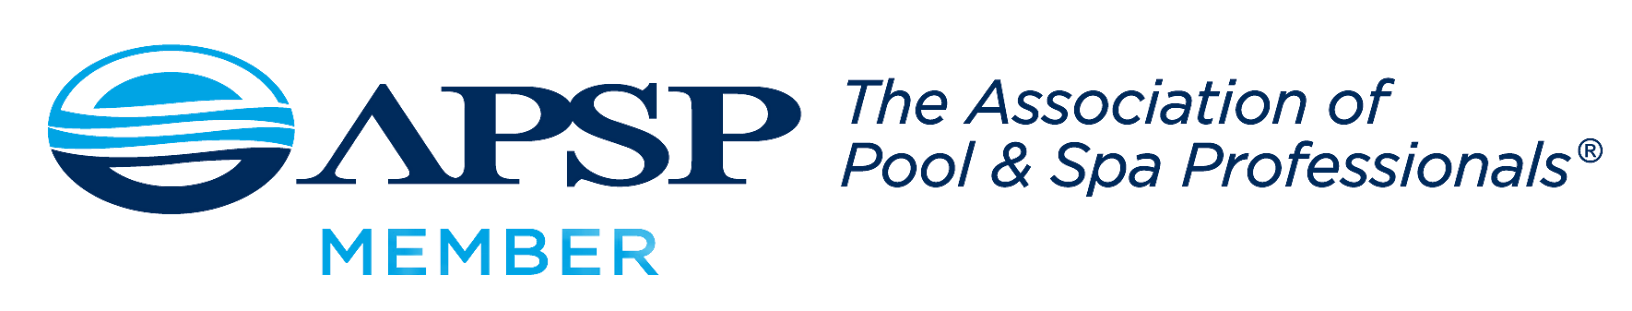 APSP Member, The Association of Pool and Spa Professionals